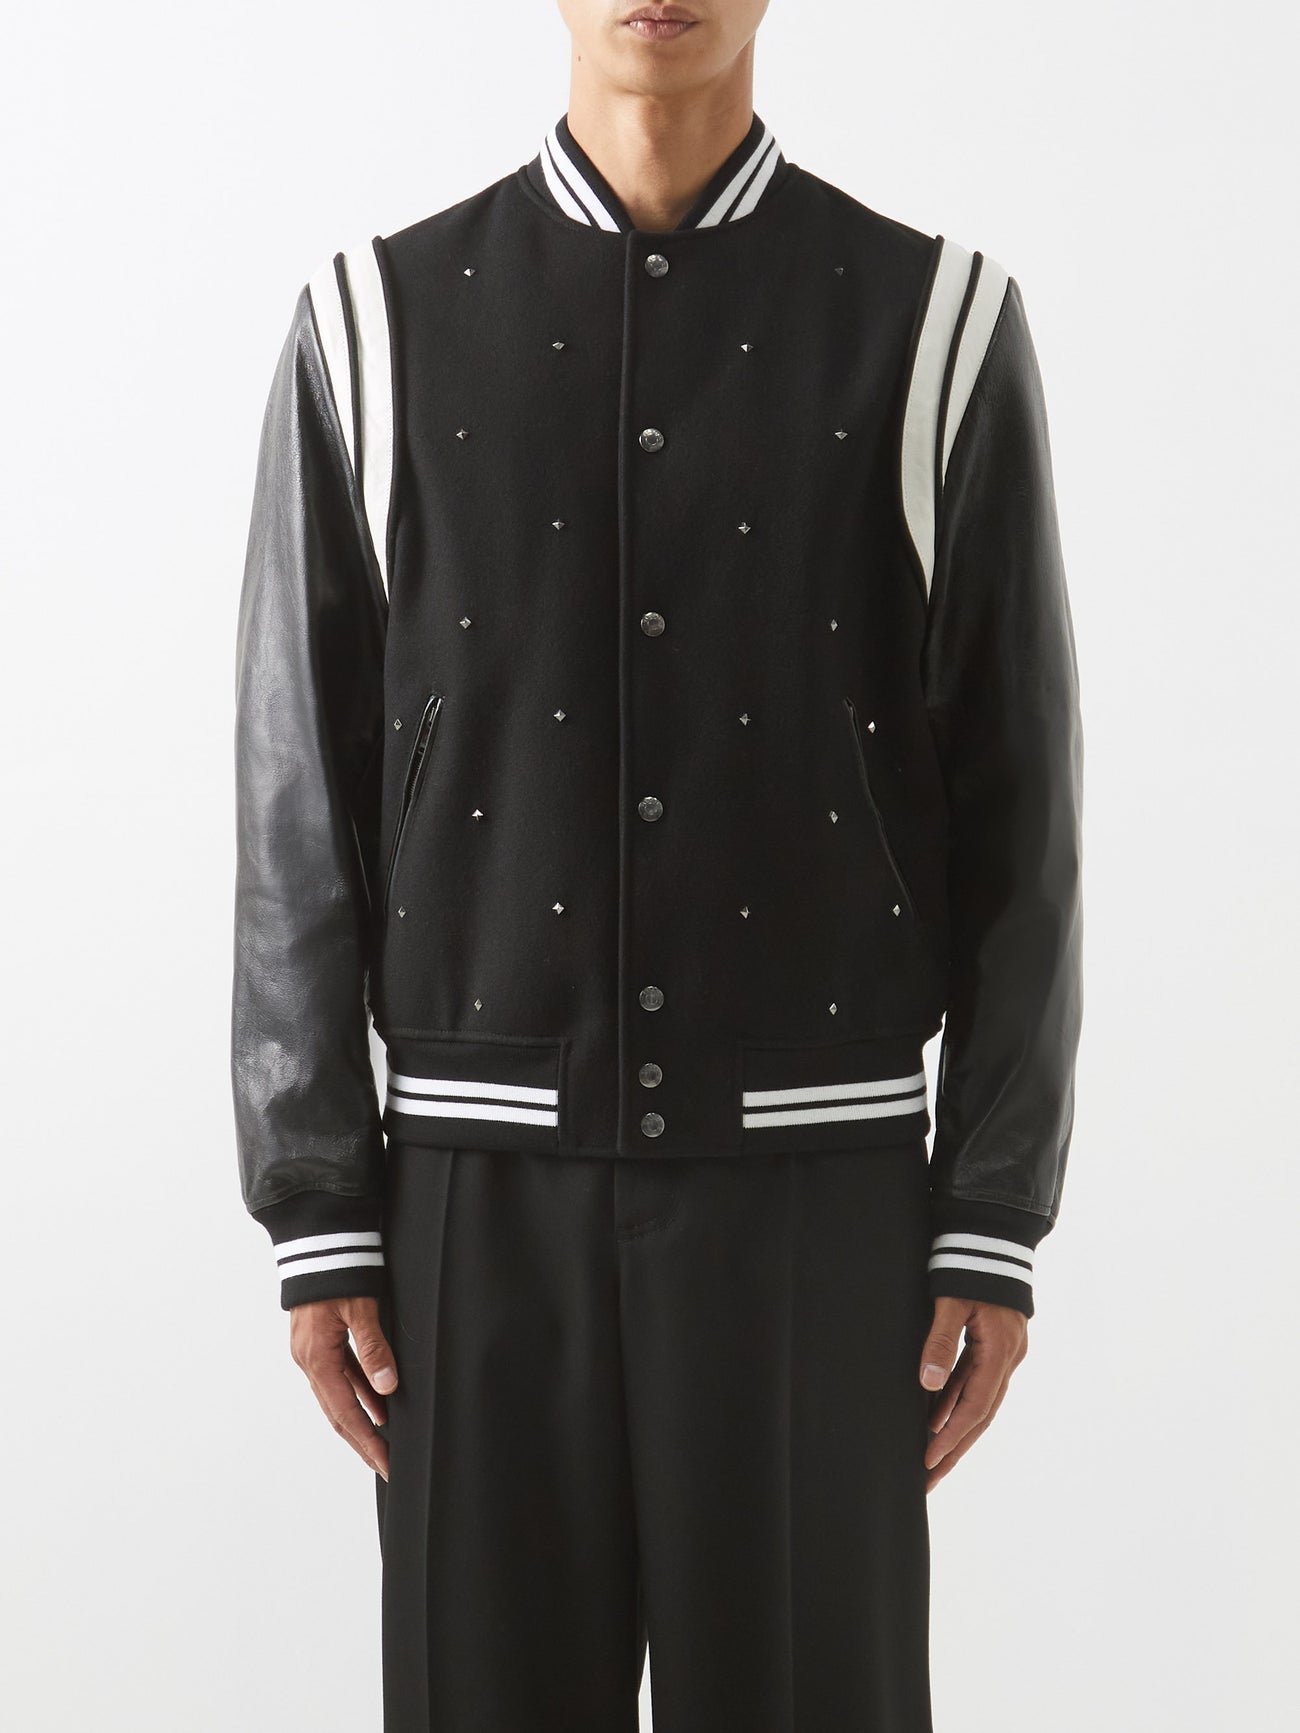 Valentino Leather And Wool Varsity Jacket in Black | Endource